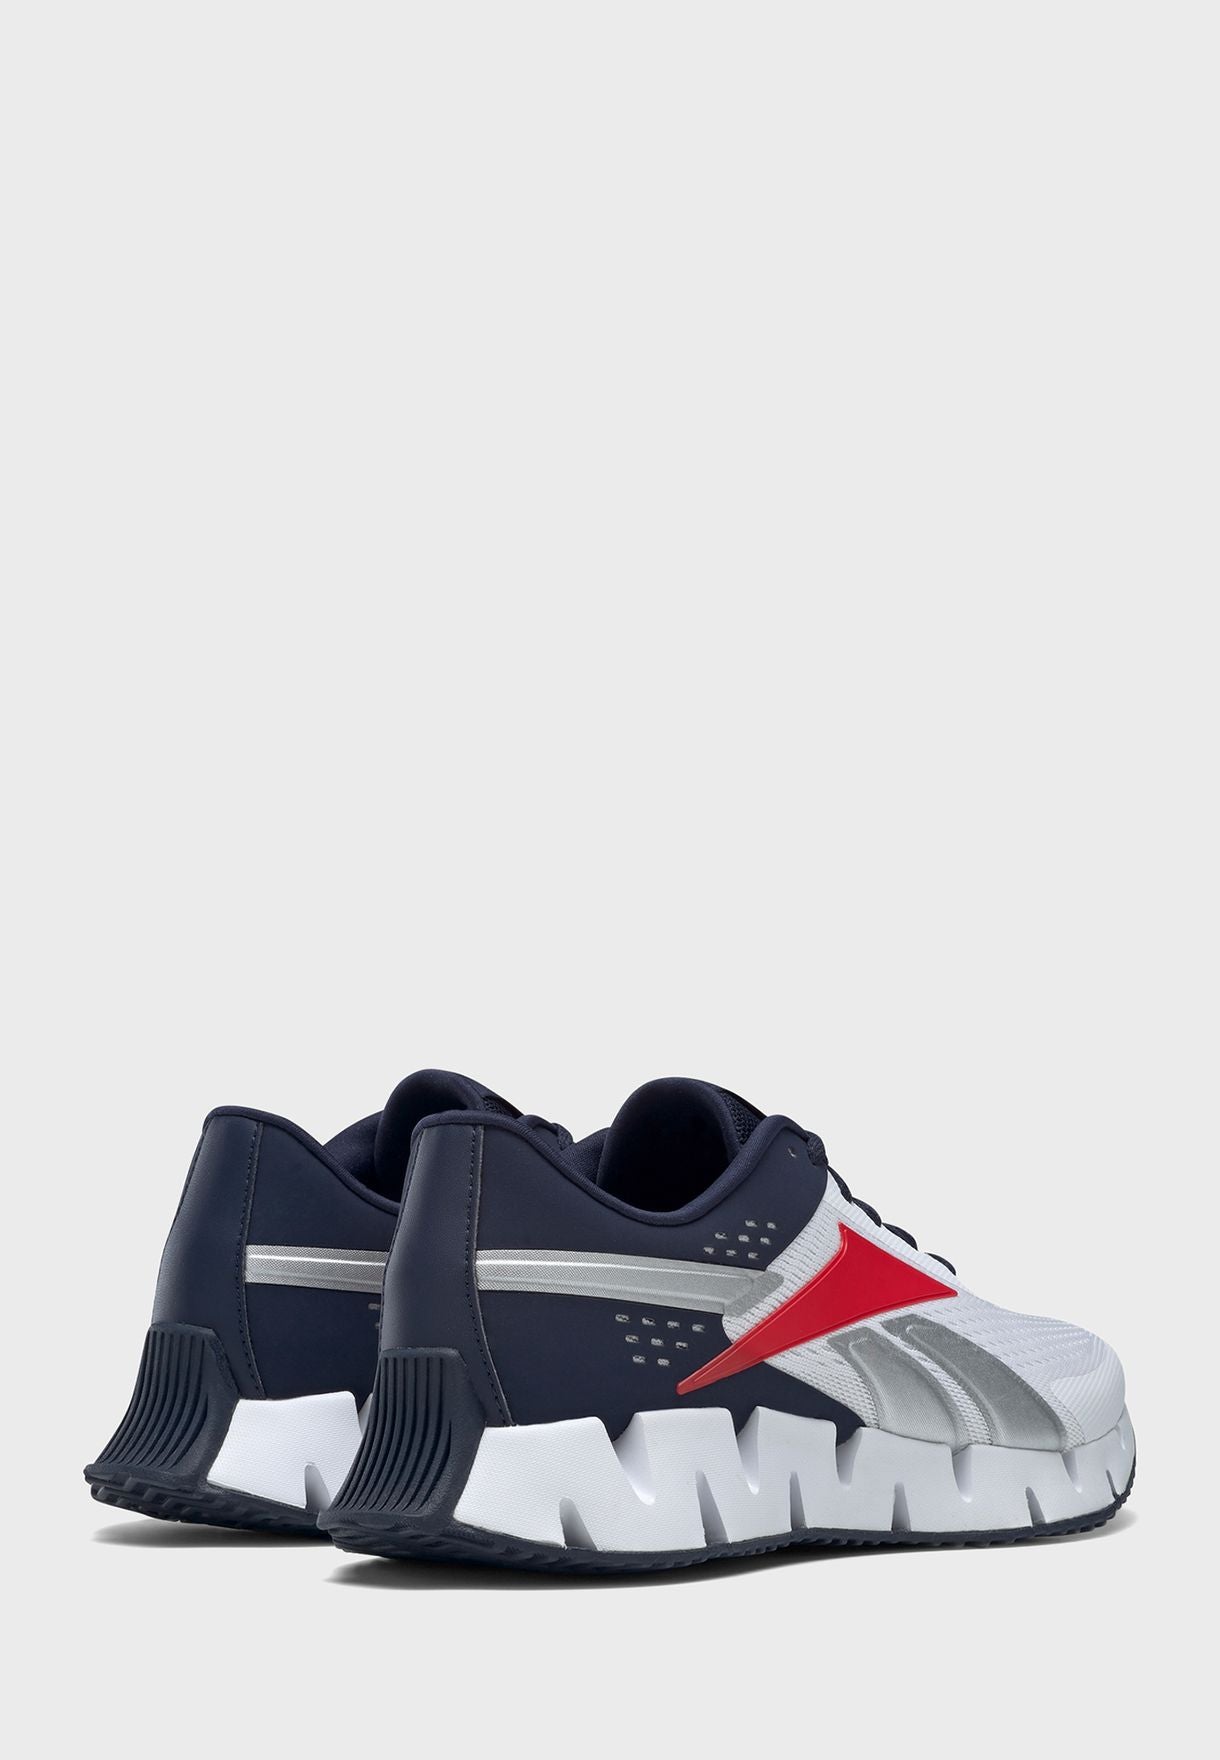 Reebok Zig Dynamica 2 Shoes White/Red/Navy Blue